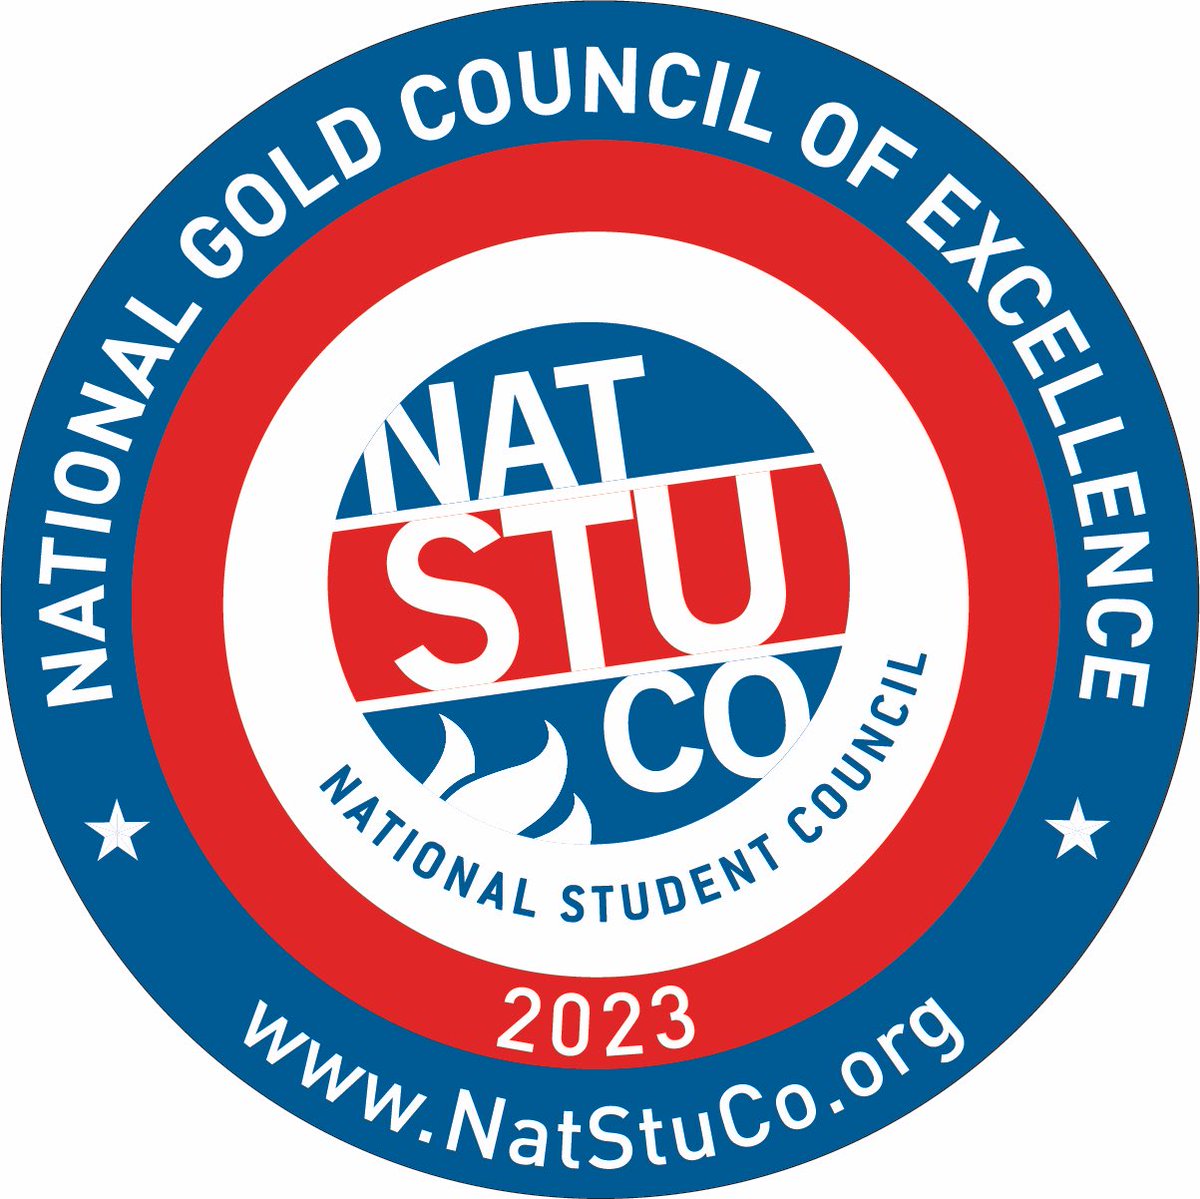 Congratulations to the @dvhsstuco_ on earning the 2023 National Gold Council of Excellence for the @NatStuCo Way to represent #THEDISTRICTofCHAMPIONS #OFOD #ItsWhatWeDo #WeAreOne #ARatedCampus #BeBold #BeCourageous #BeTheChange #BeTHEDISTRICT @ysletaisd @IvanCedilloYISD @cmlopez1